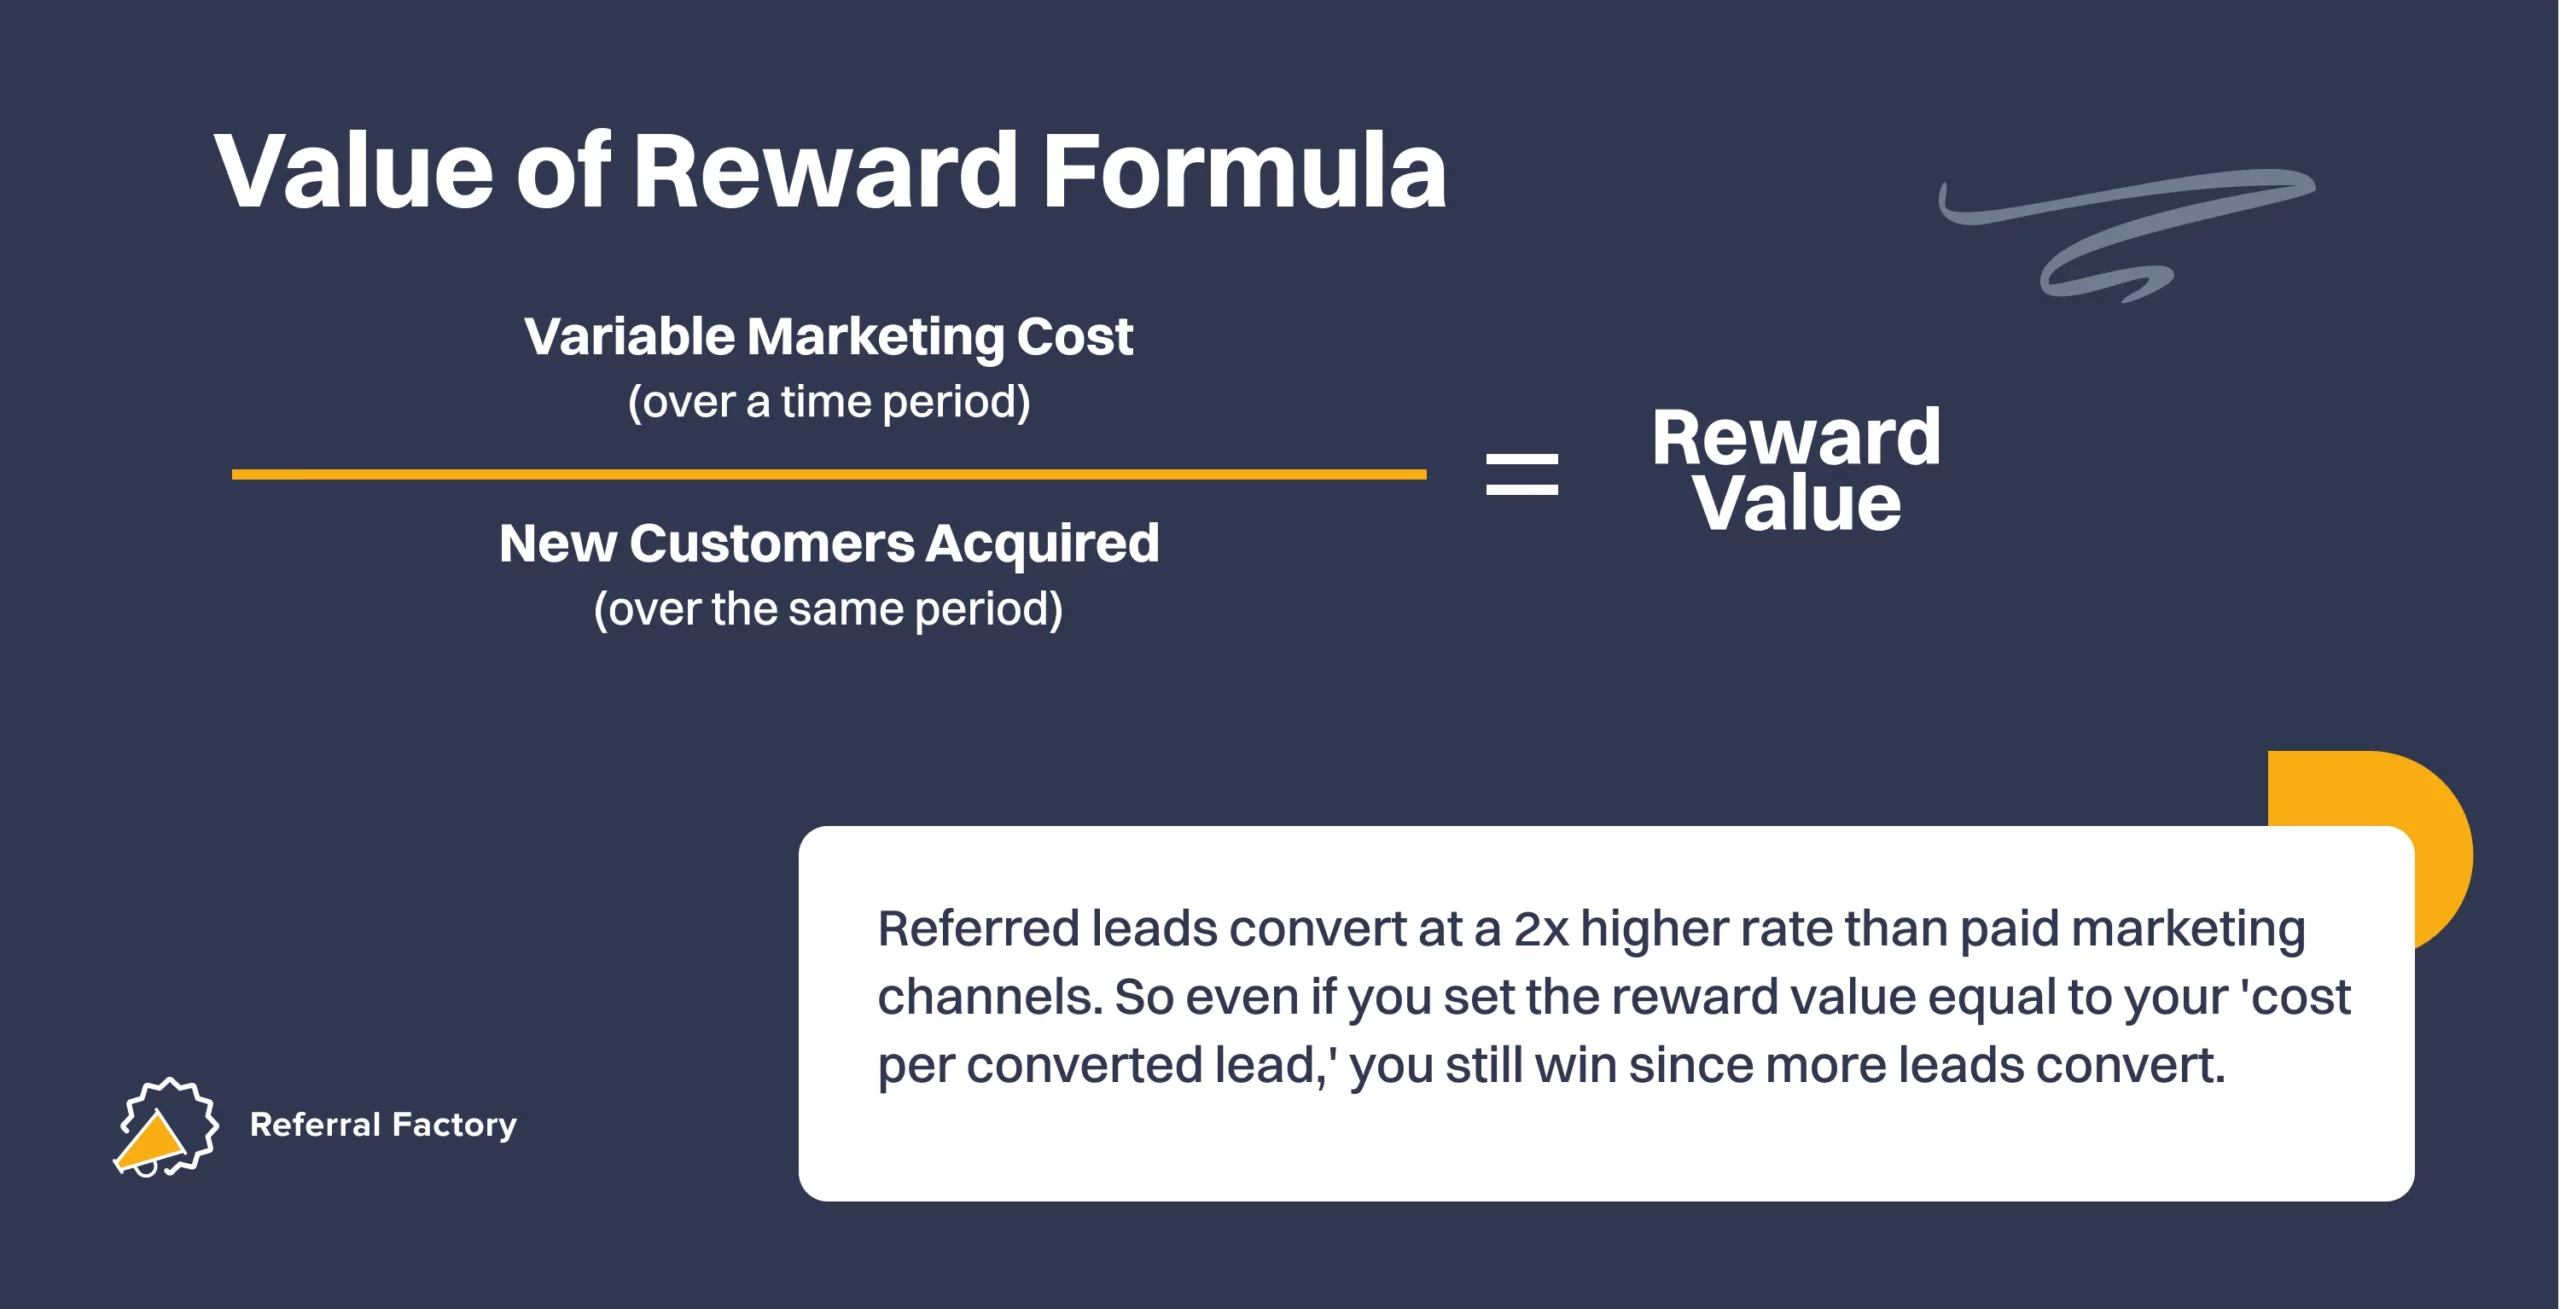 how to calculate the value of a referral reward formula 